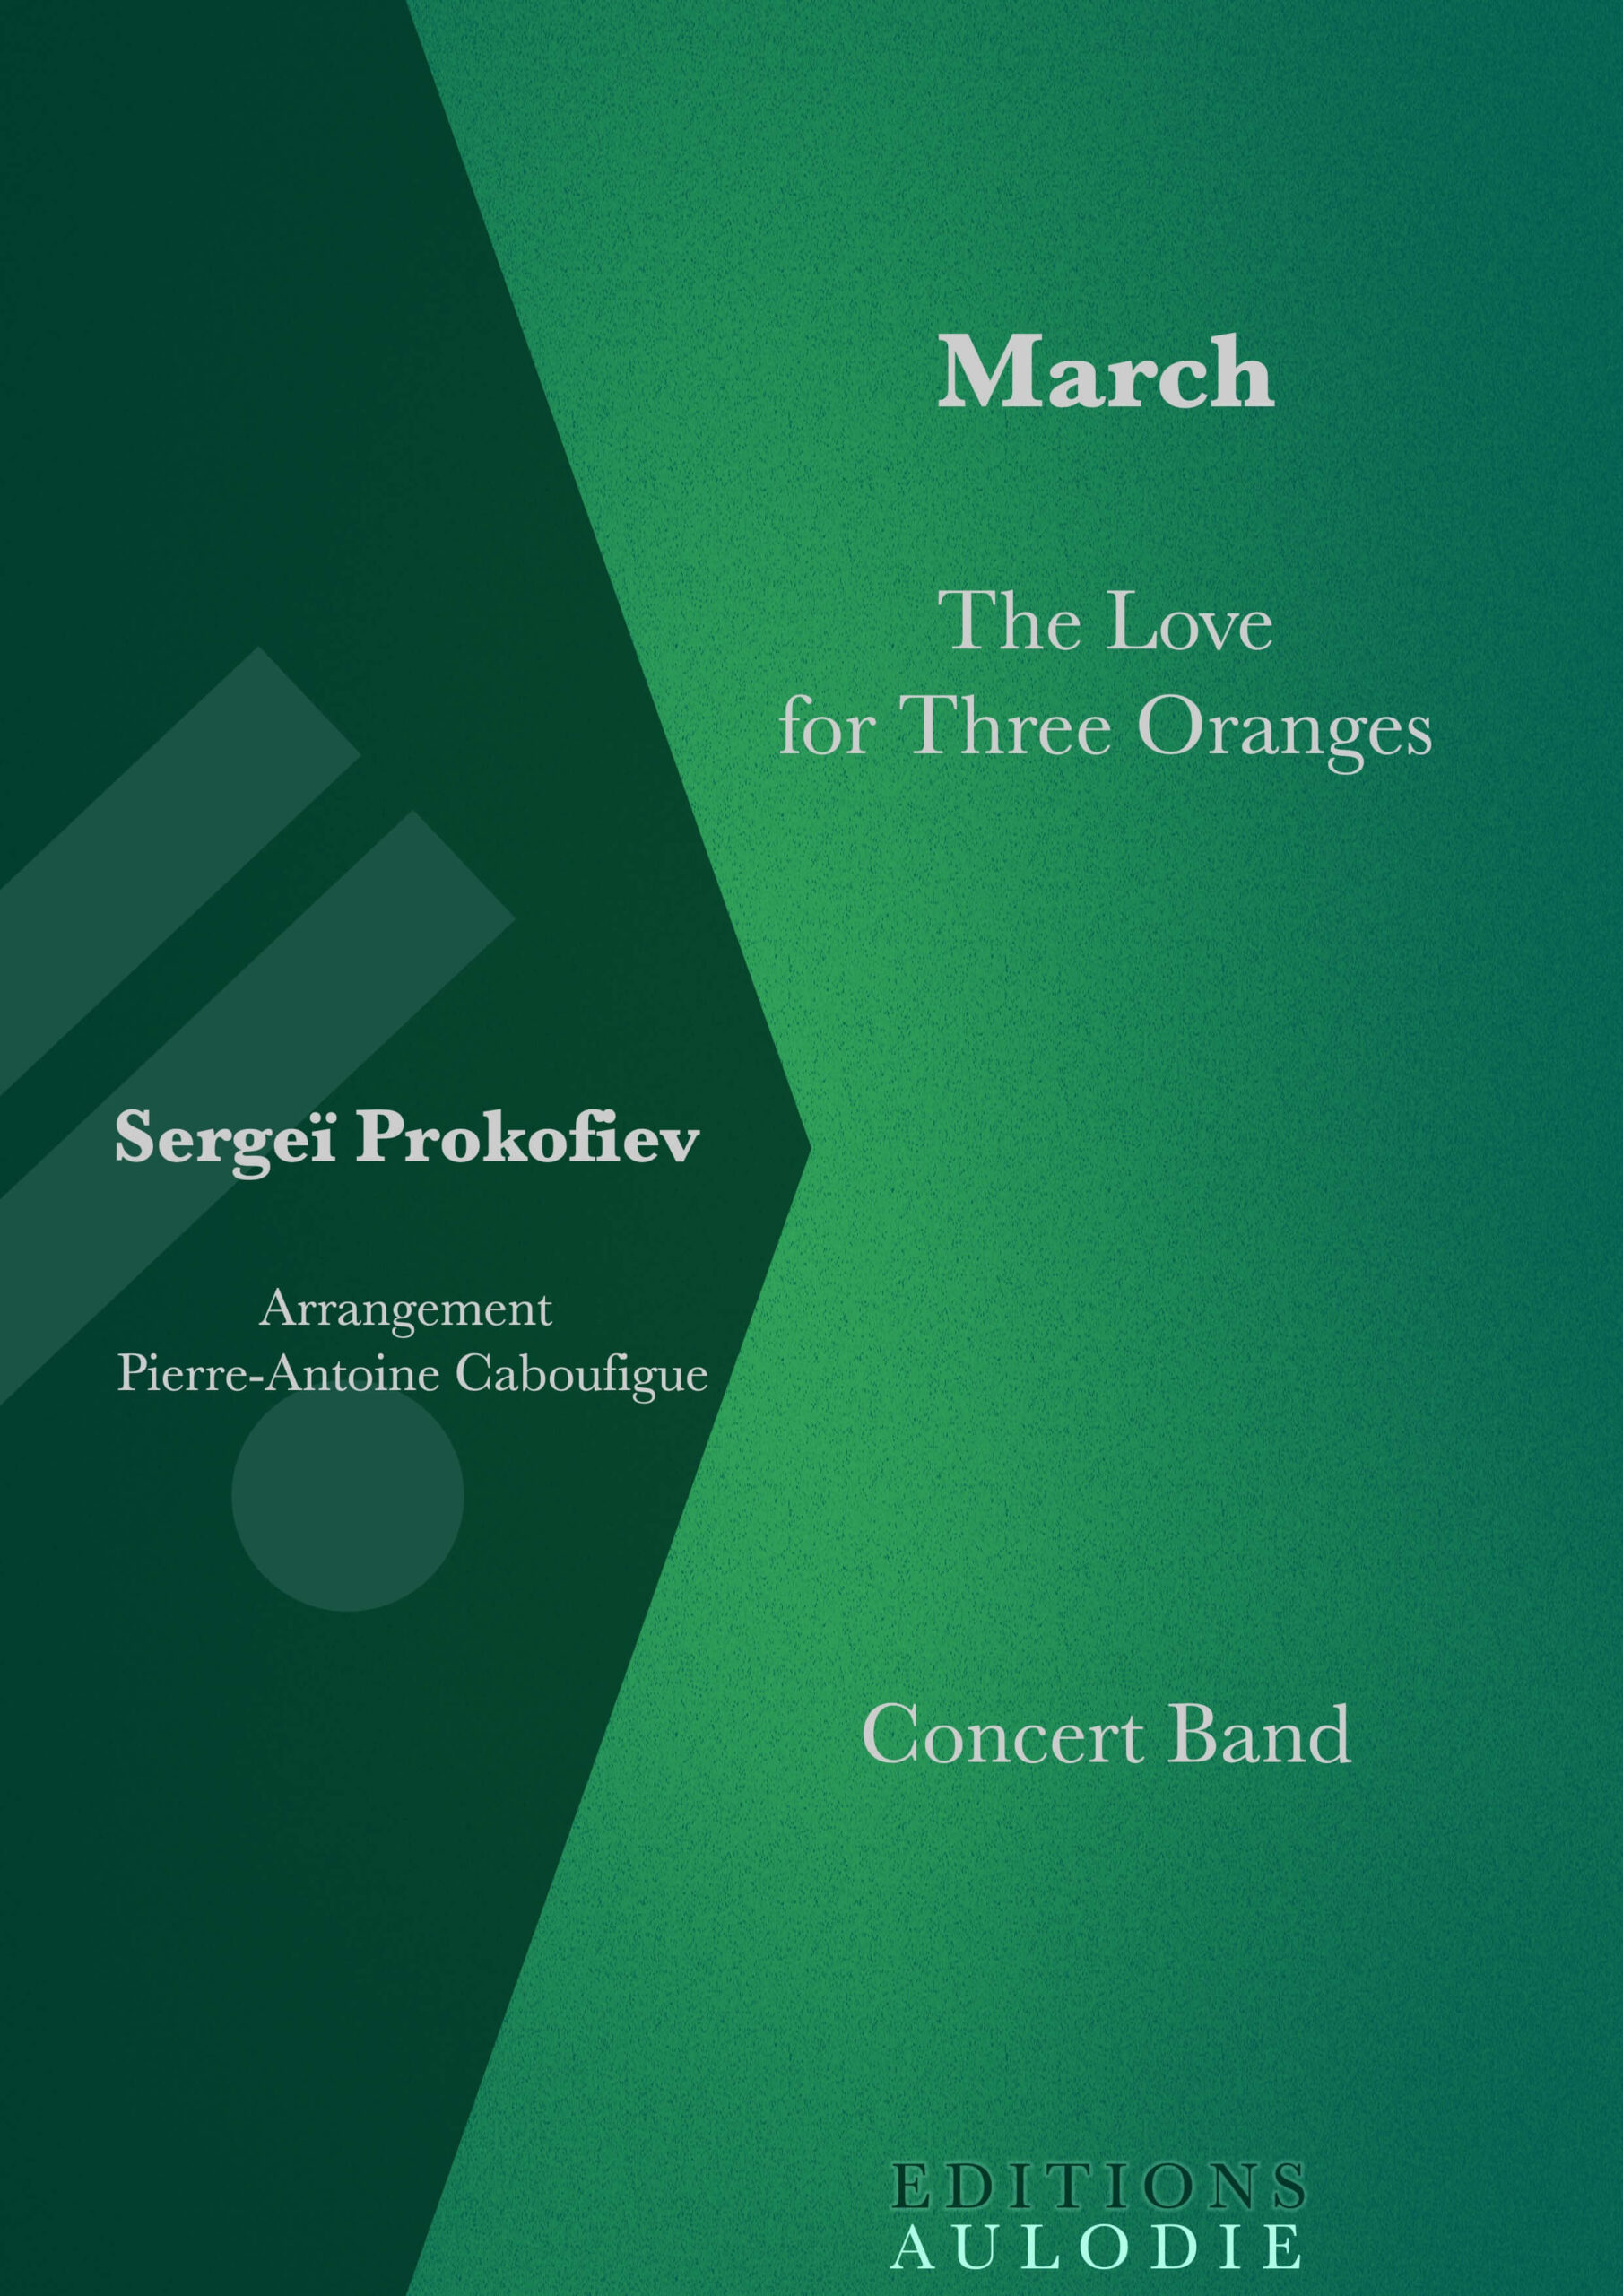 EA01051-March-The_Love_for_Three_Oranges-Sergei_Prokofiev-Concert_Band